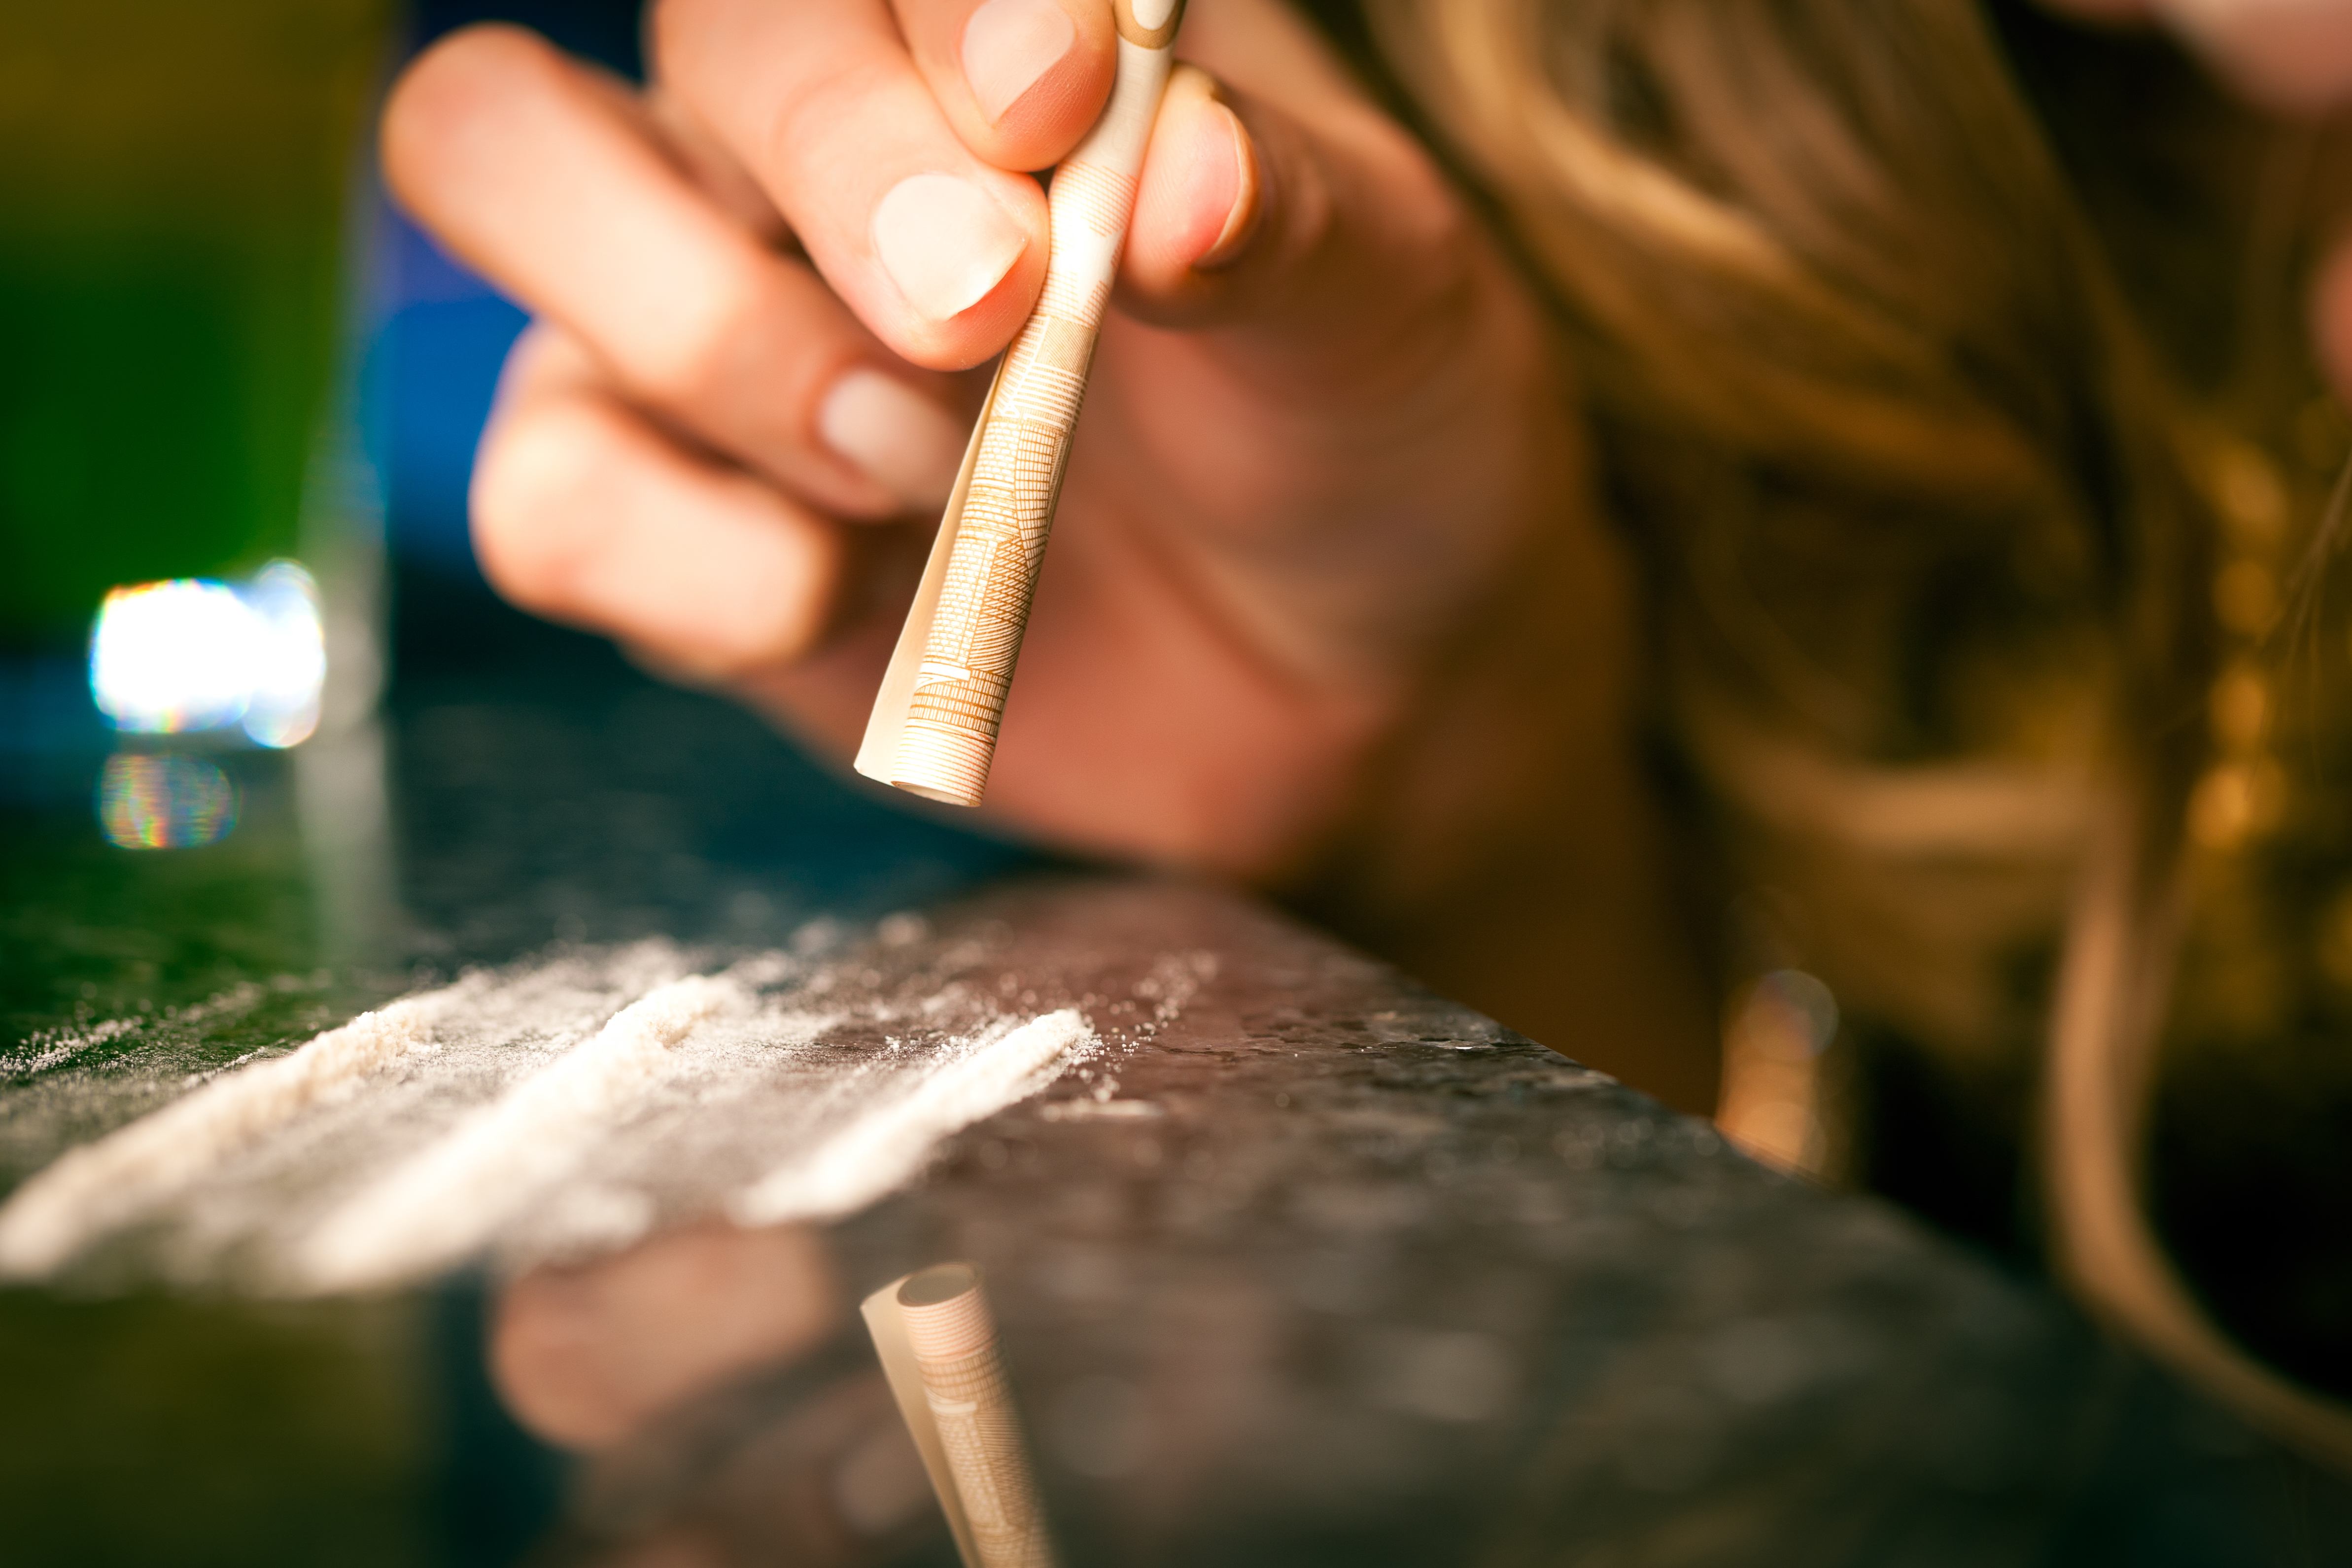 More cocaine is being used in Canada amid drug overdose crisis